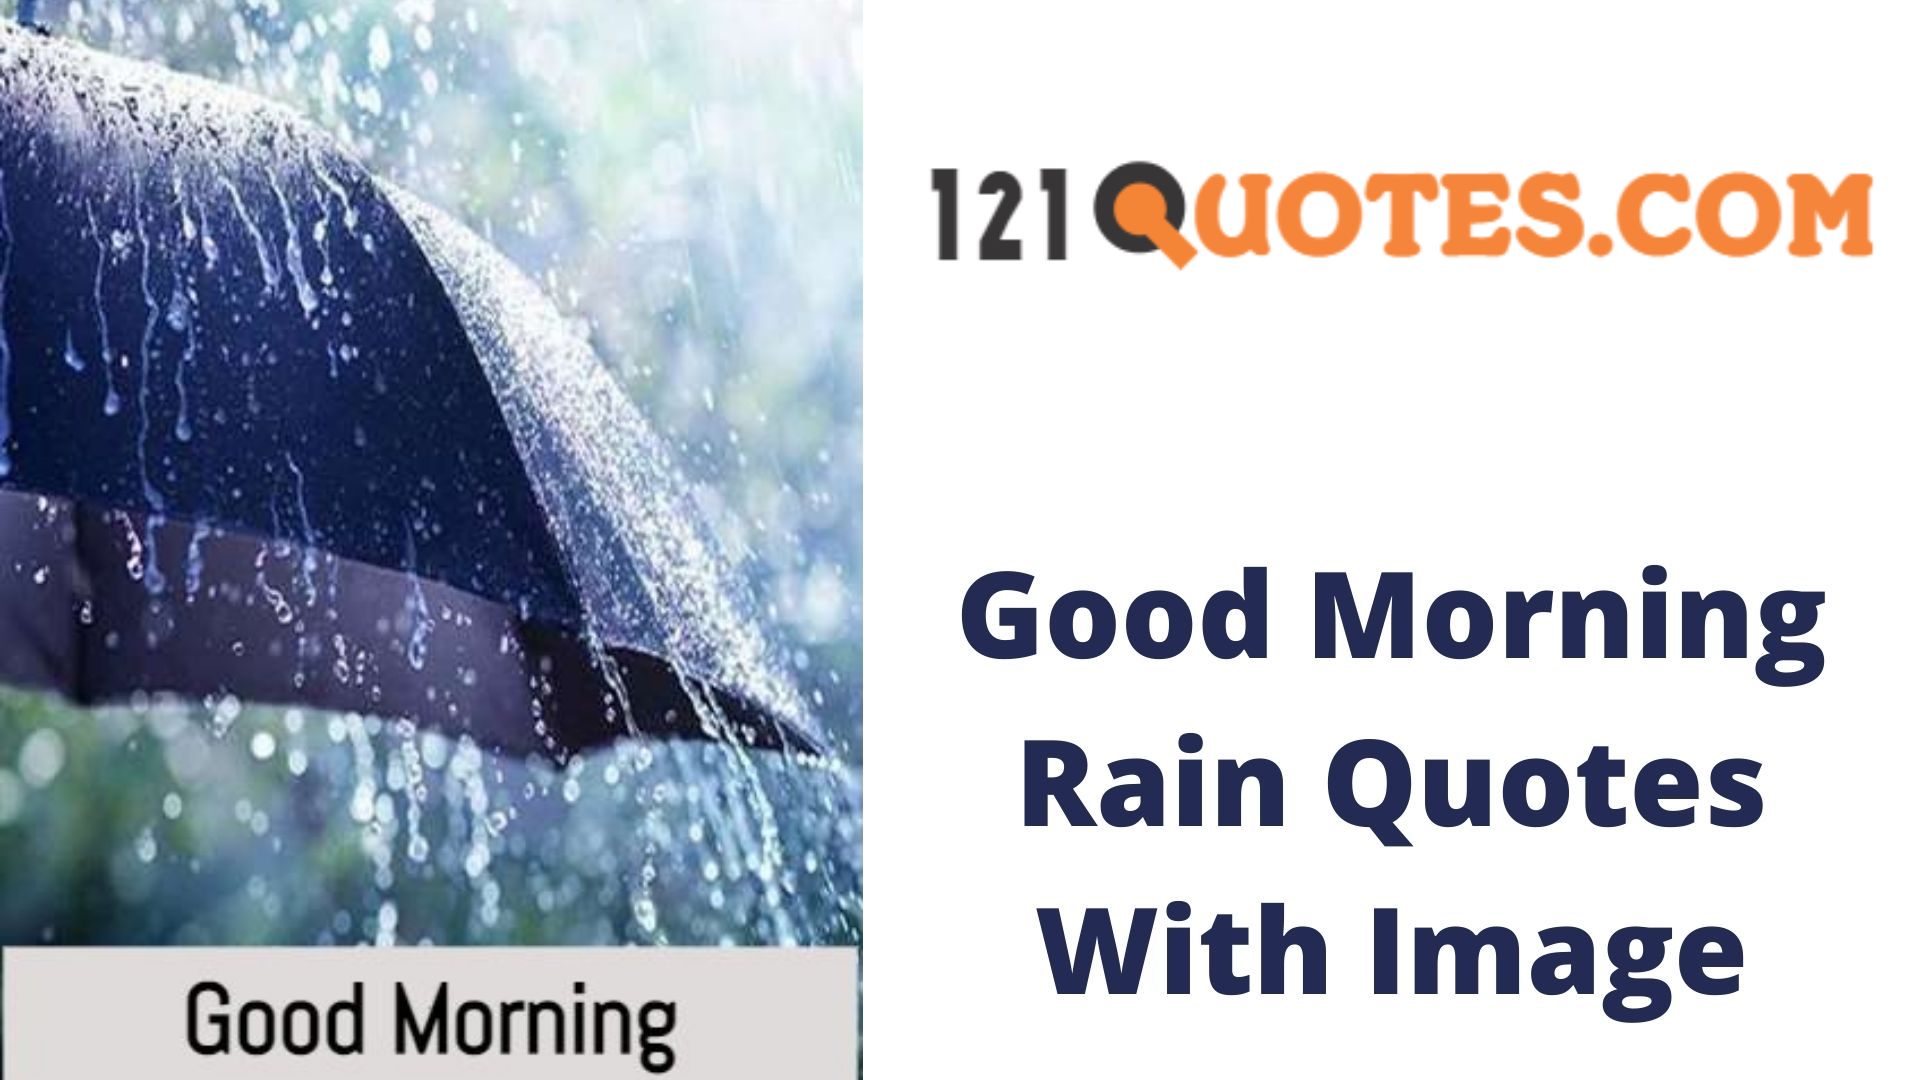 Quotes about Rainy Days. Save up for a Rainy Day идиома. Save for a Rainy Day idiom. To feel under the weather to save up for a Rainy Day. Rain best present